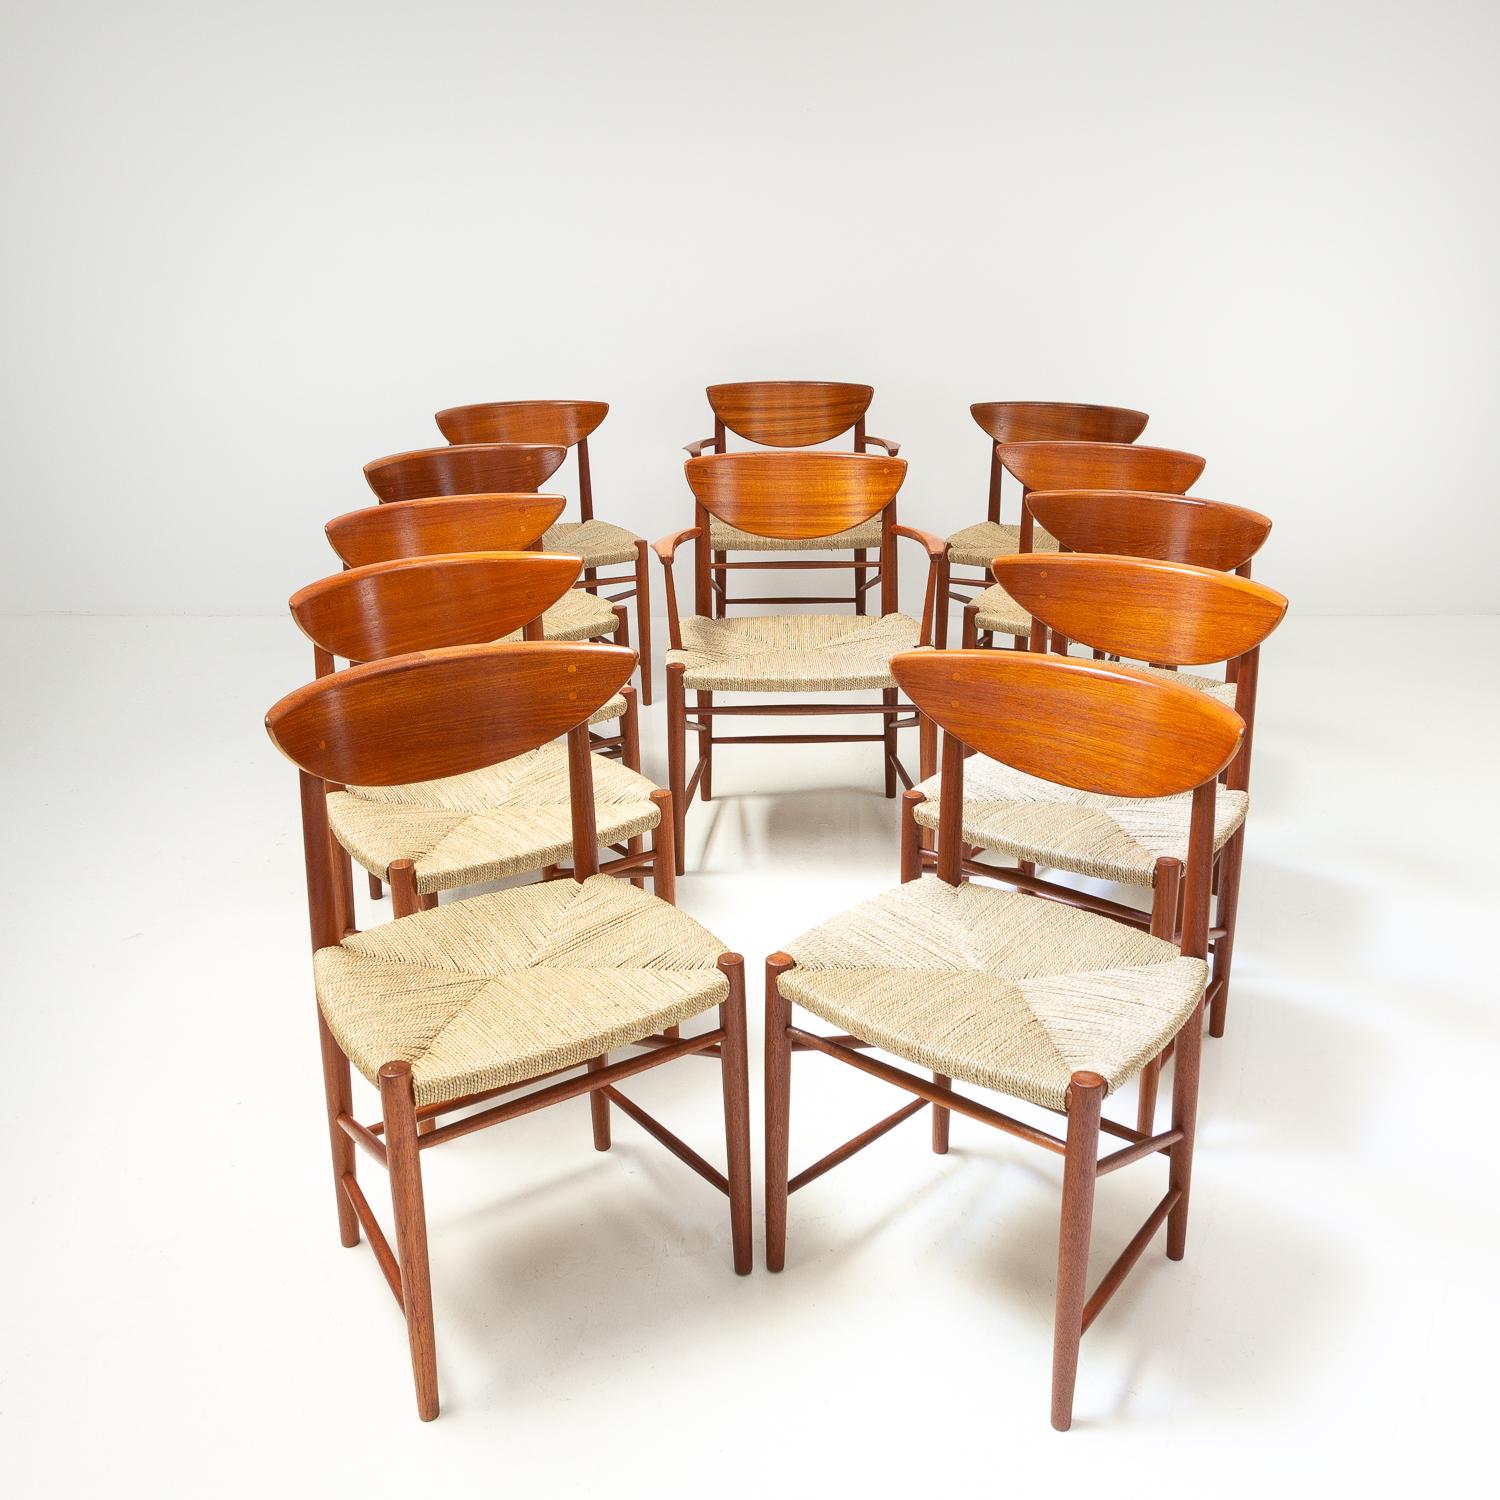 An excellent set of 12 dining chairs by Hvidt and Mølgaard-Nielsen Model 313 and 316 teak and seagrass for Søborg Møbelfabrik. 10 side chairs and two armchairs. Fully restored frames with new seagrass seats.